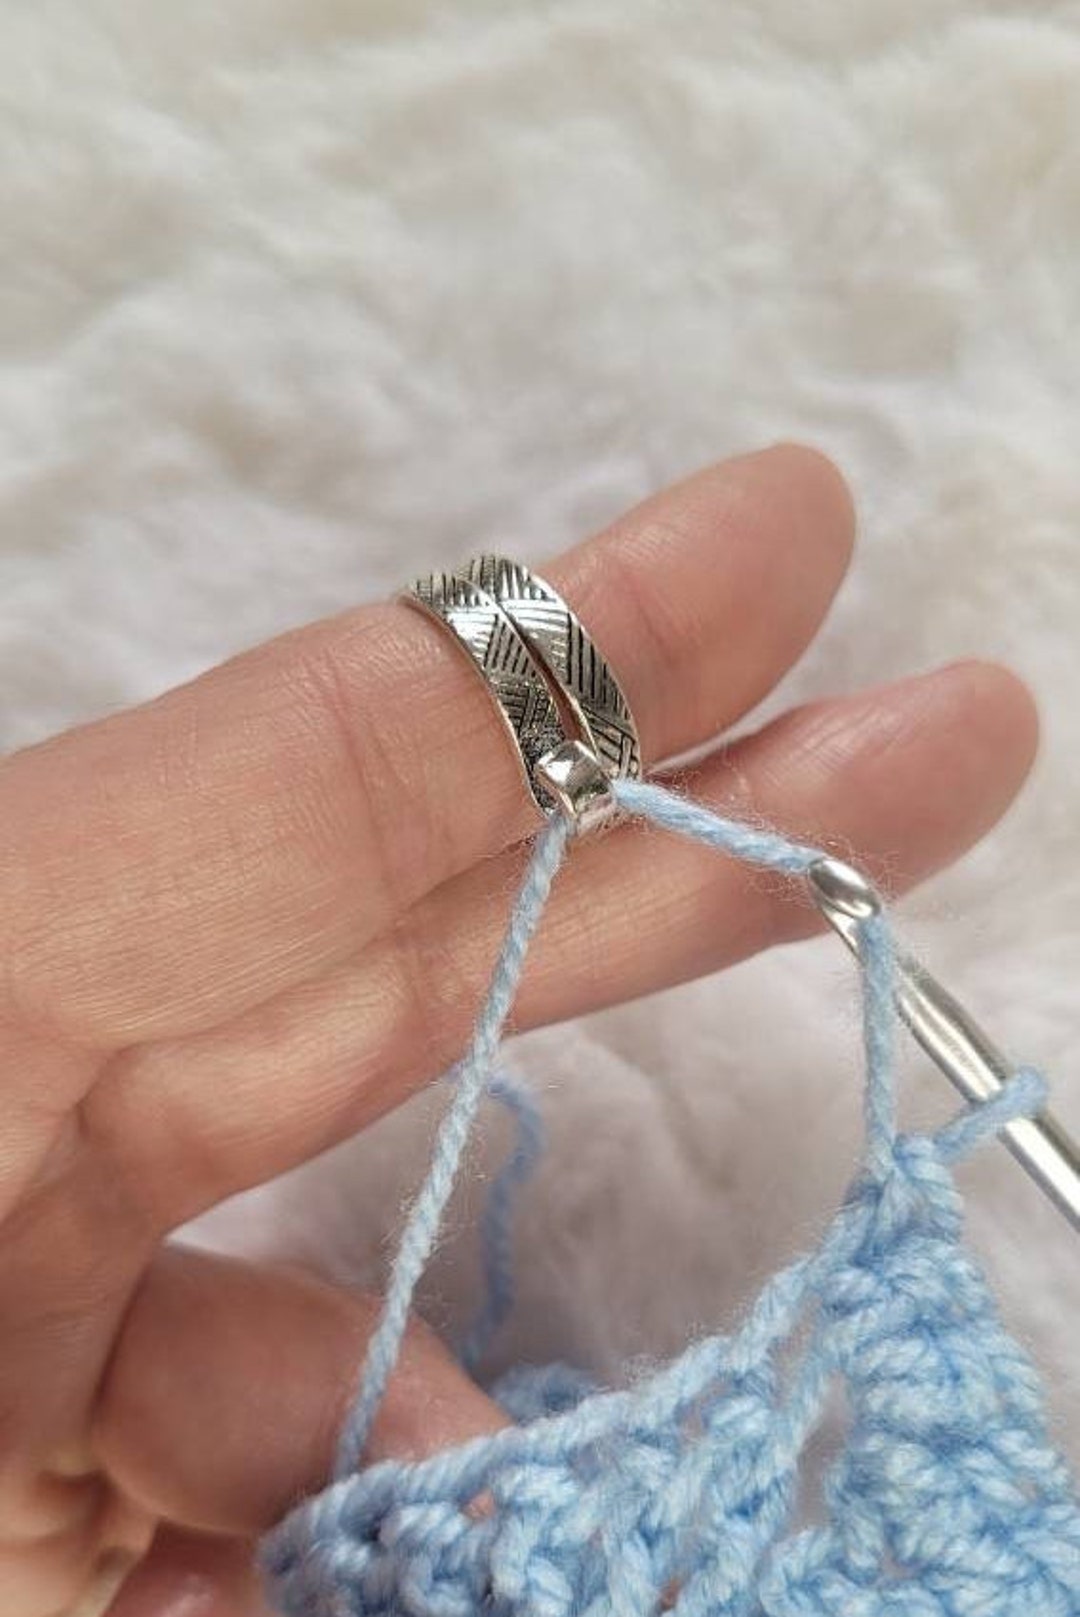 Original Crochet Rings Are Great for Arthritic Relief While Crocheting,  Custom Made to Fit Your Finger Just Right, Arthritis Knitting Rings 